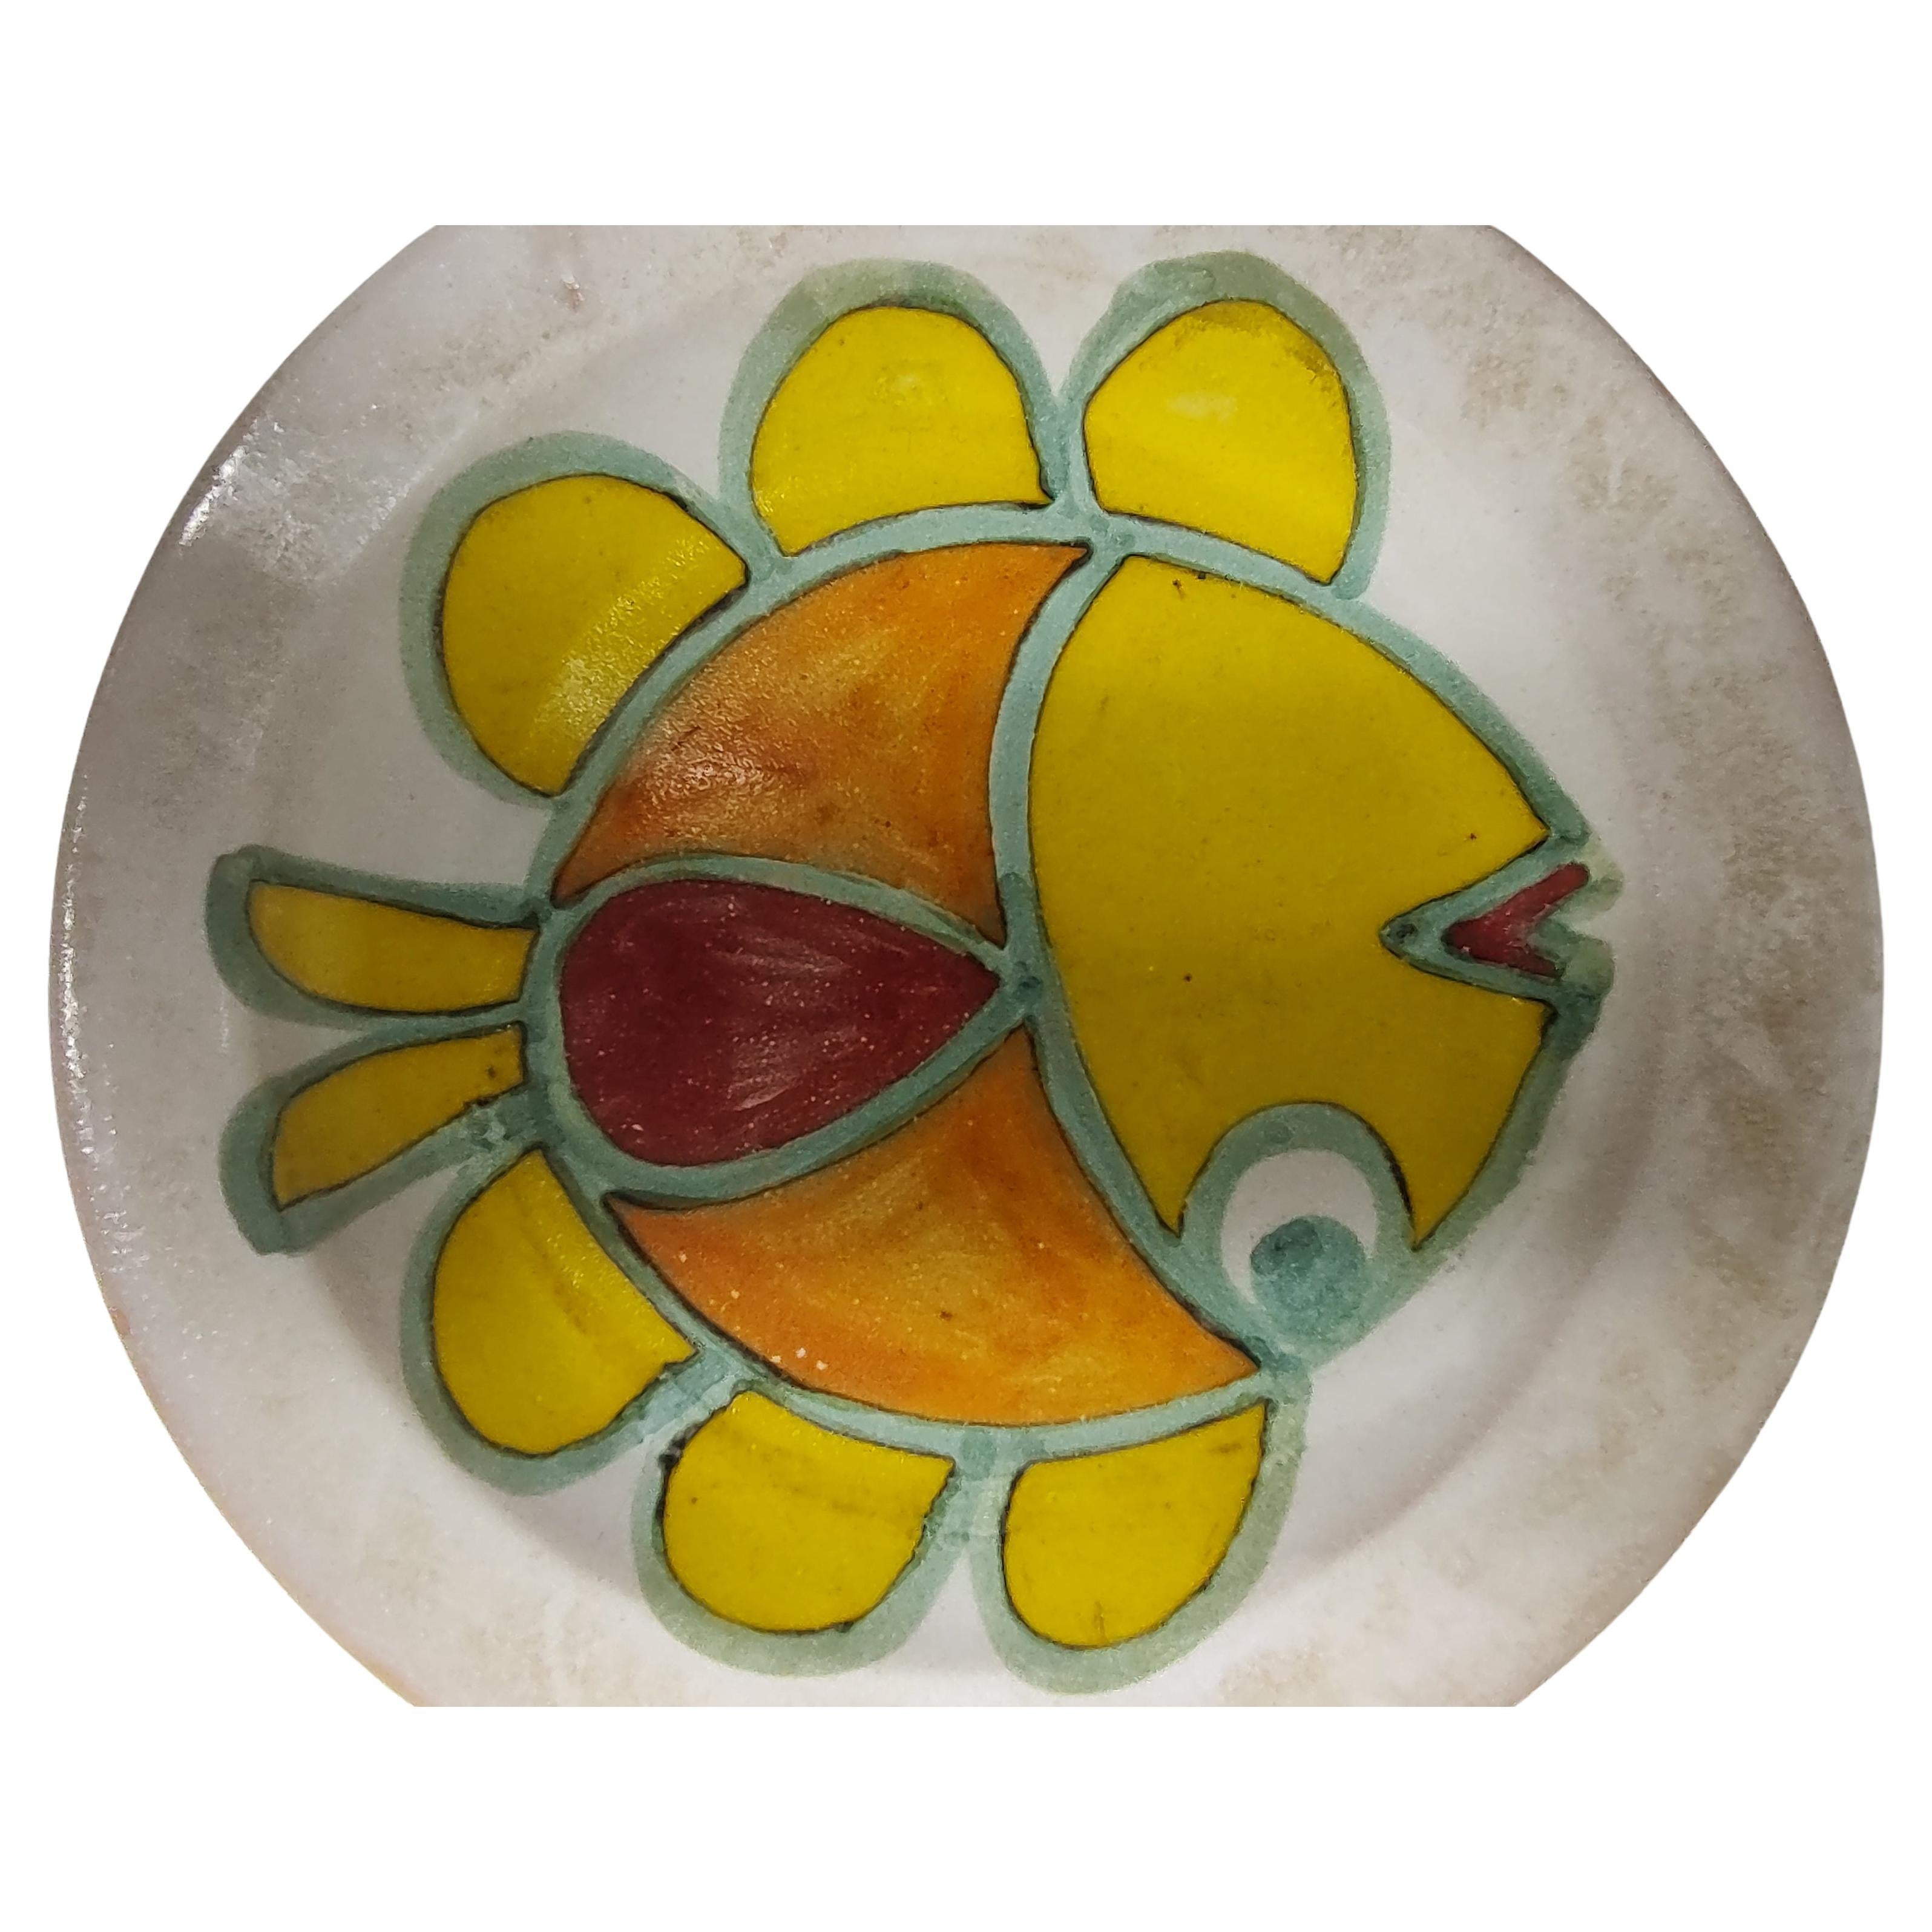 Fabulous Plate / bowl by Giovanni De Simone with a very colorful fish decoration. De Simone studied under Pablo Picasso and learned his craft from the master. In excellent vintage condition with a couple of tiny flea bites, see pics.